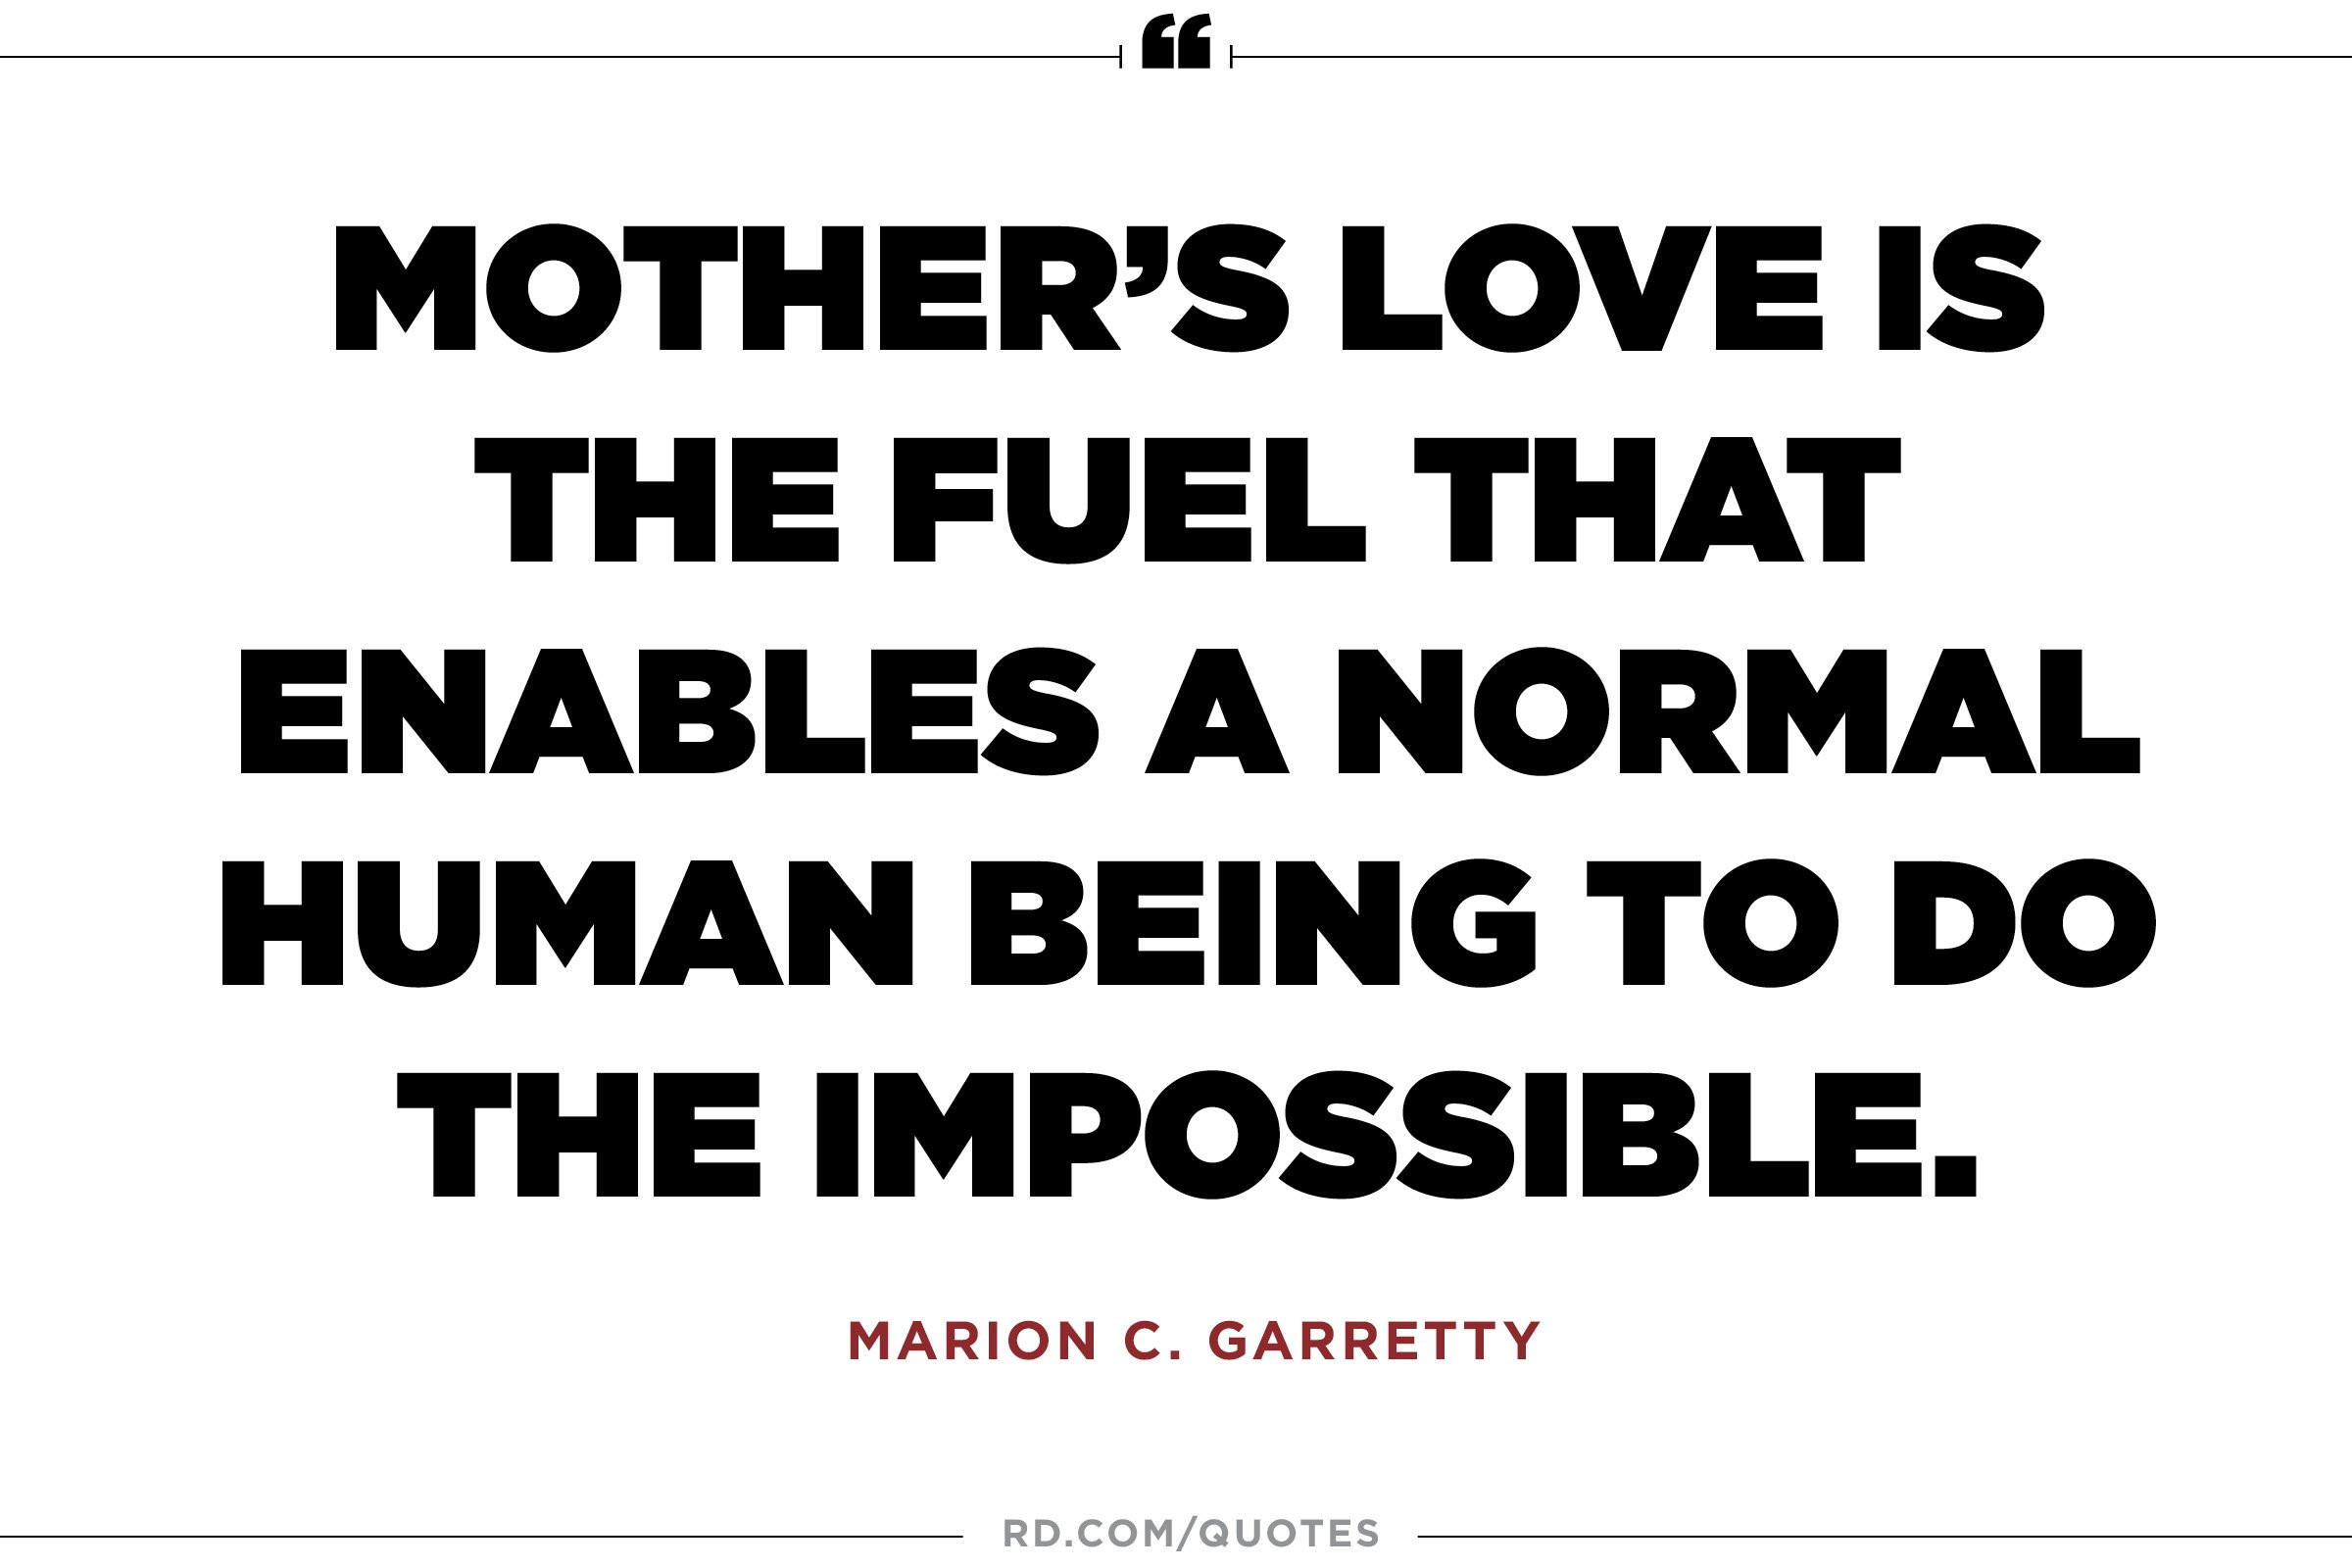 Quotes About Mother
 11 Quotes About Mothers That ll Make You Call Yours